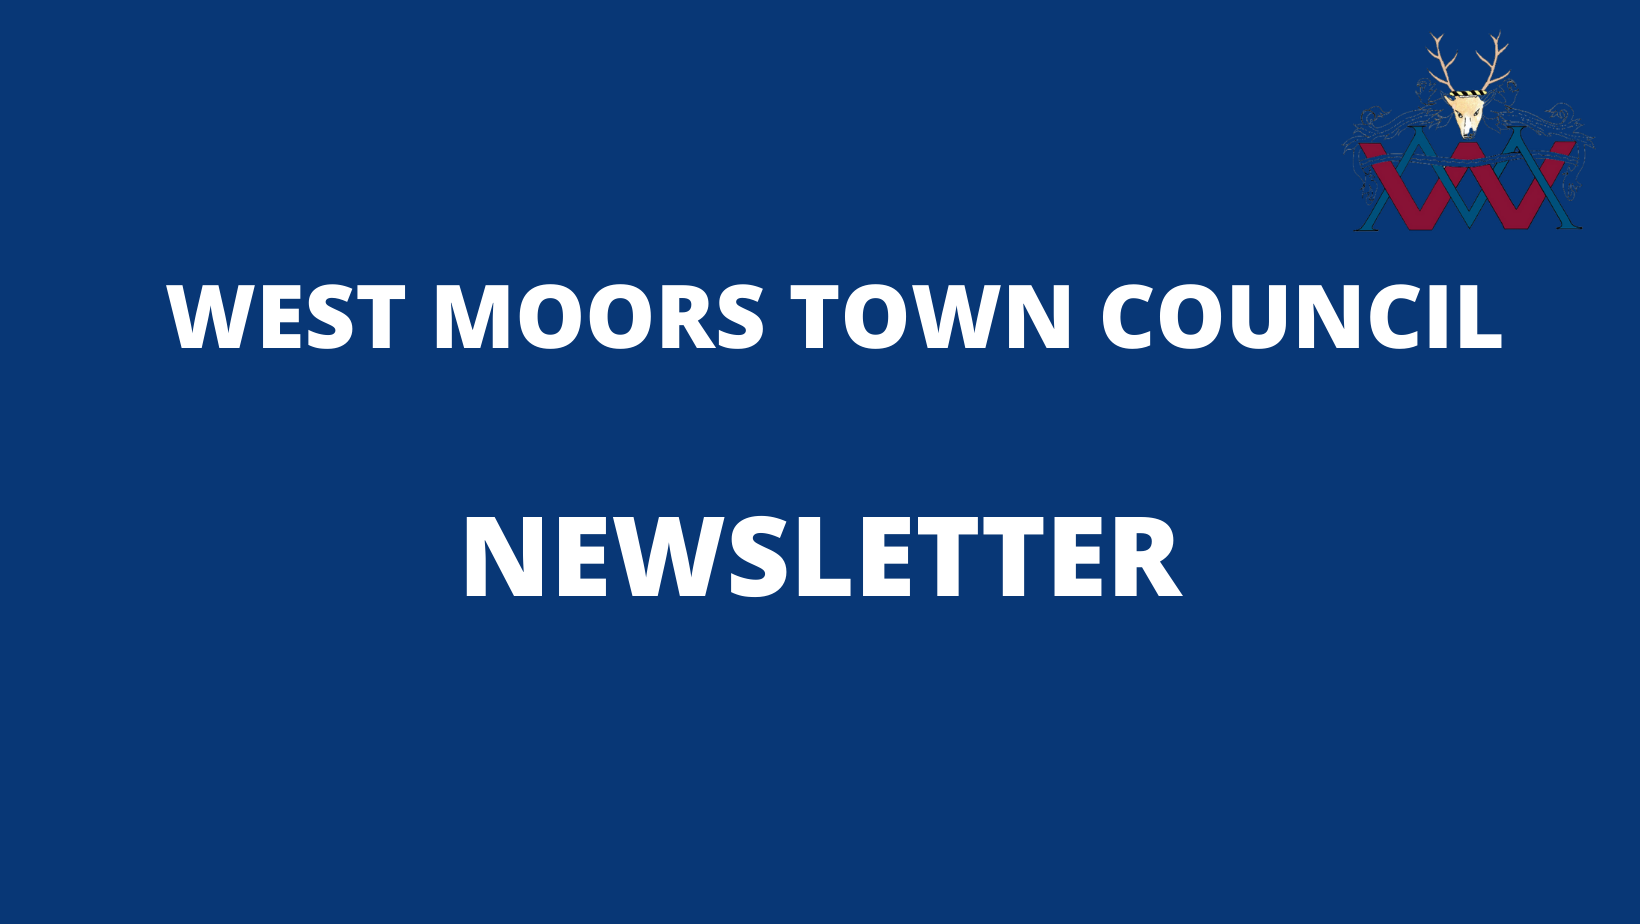 West Moors Town Council latest Newsletter Issue 16